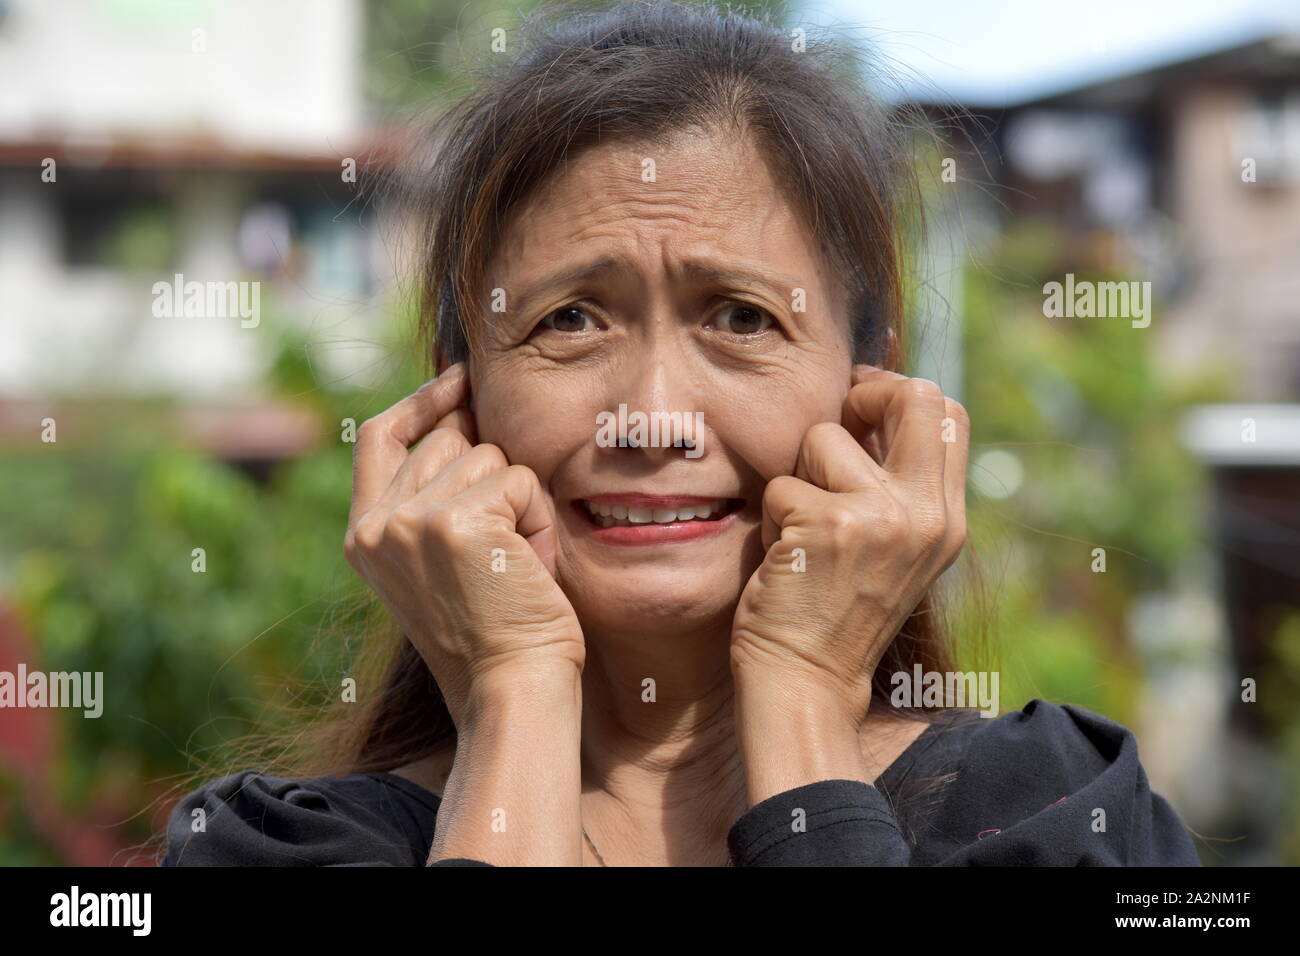 A Dementia And Adult Female Stock Photo